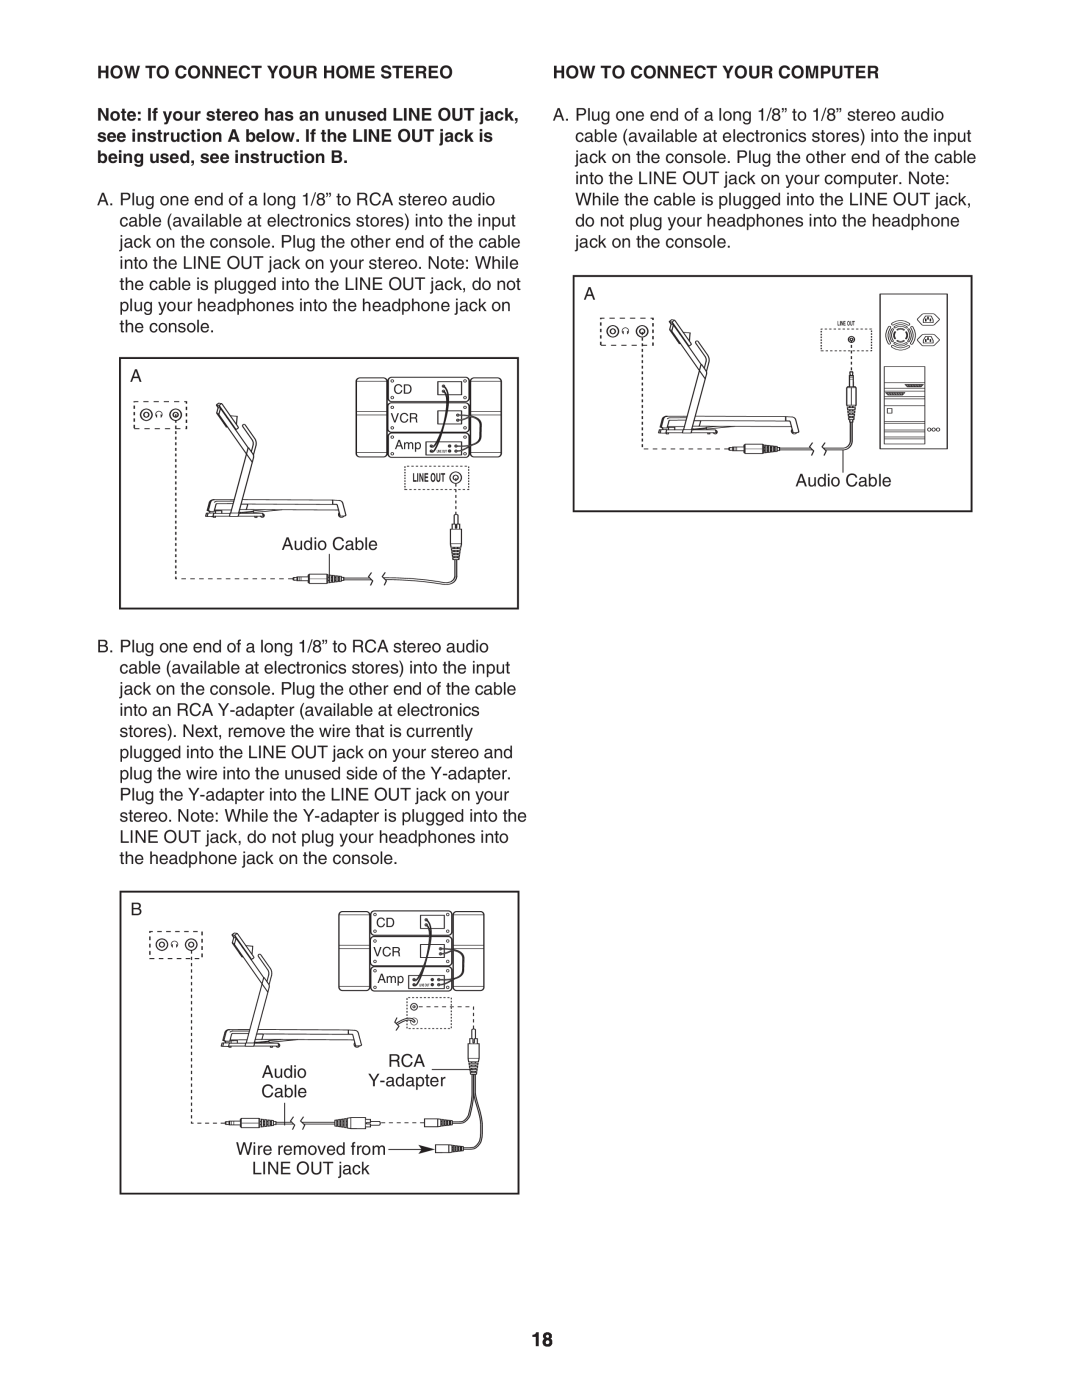 ProForm 30514.0 user manual How To Connect Your Home Stereo, How To Connect Your Computer, Line Out 